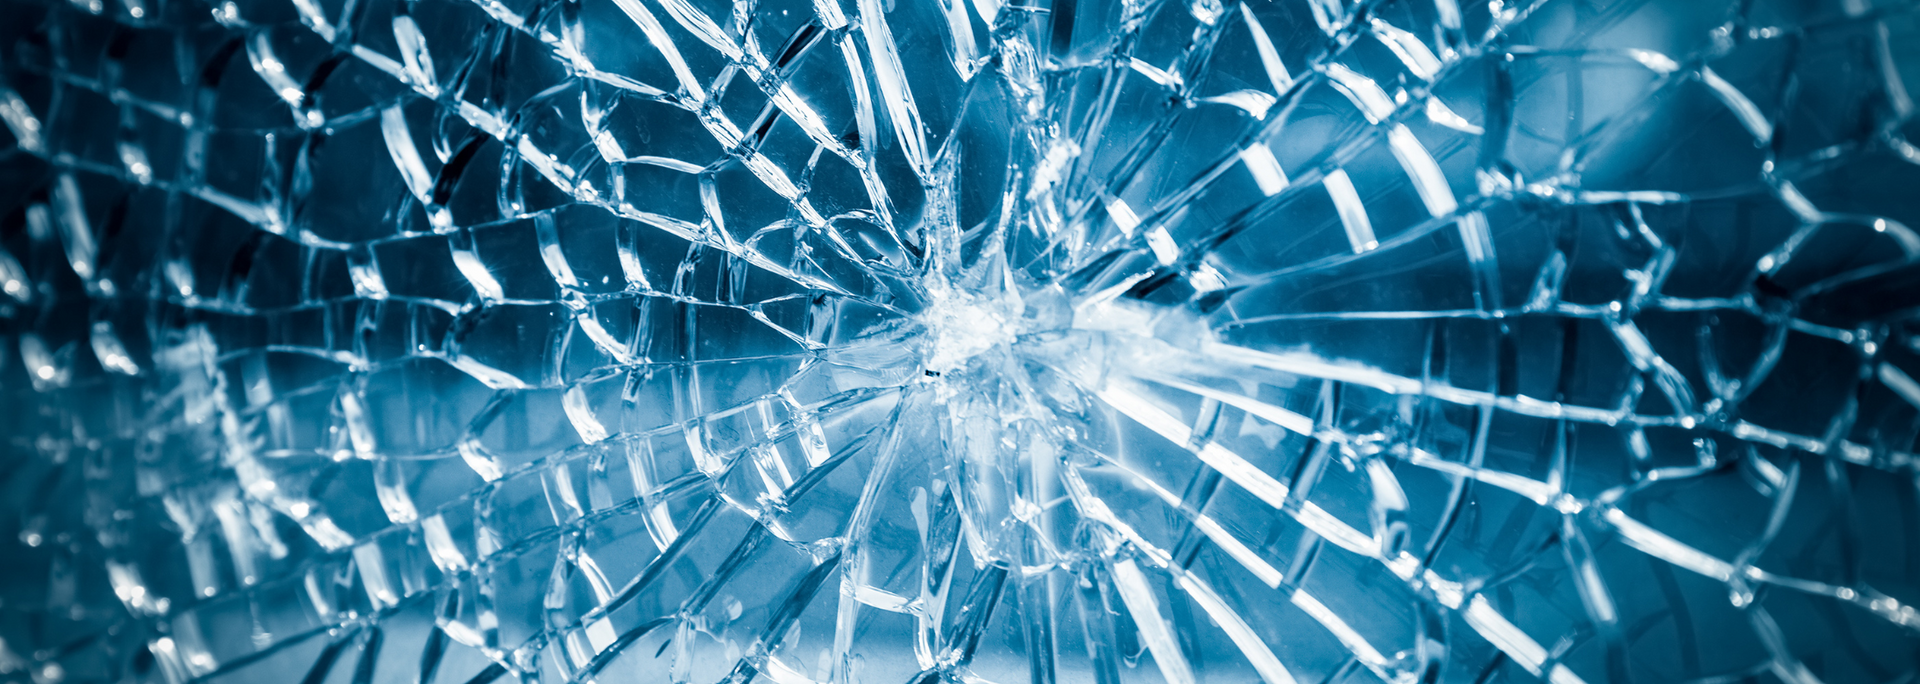 Picture of broken glass showing spider-web breakage pattern